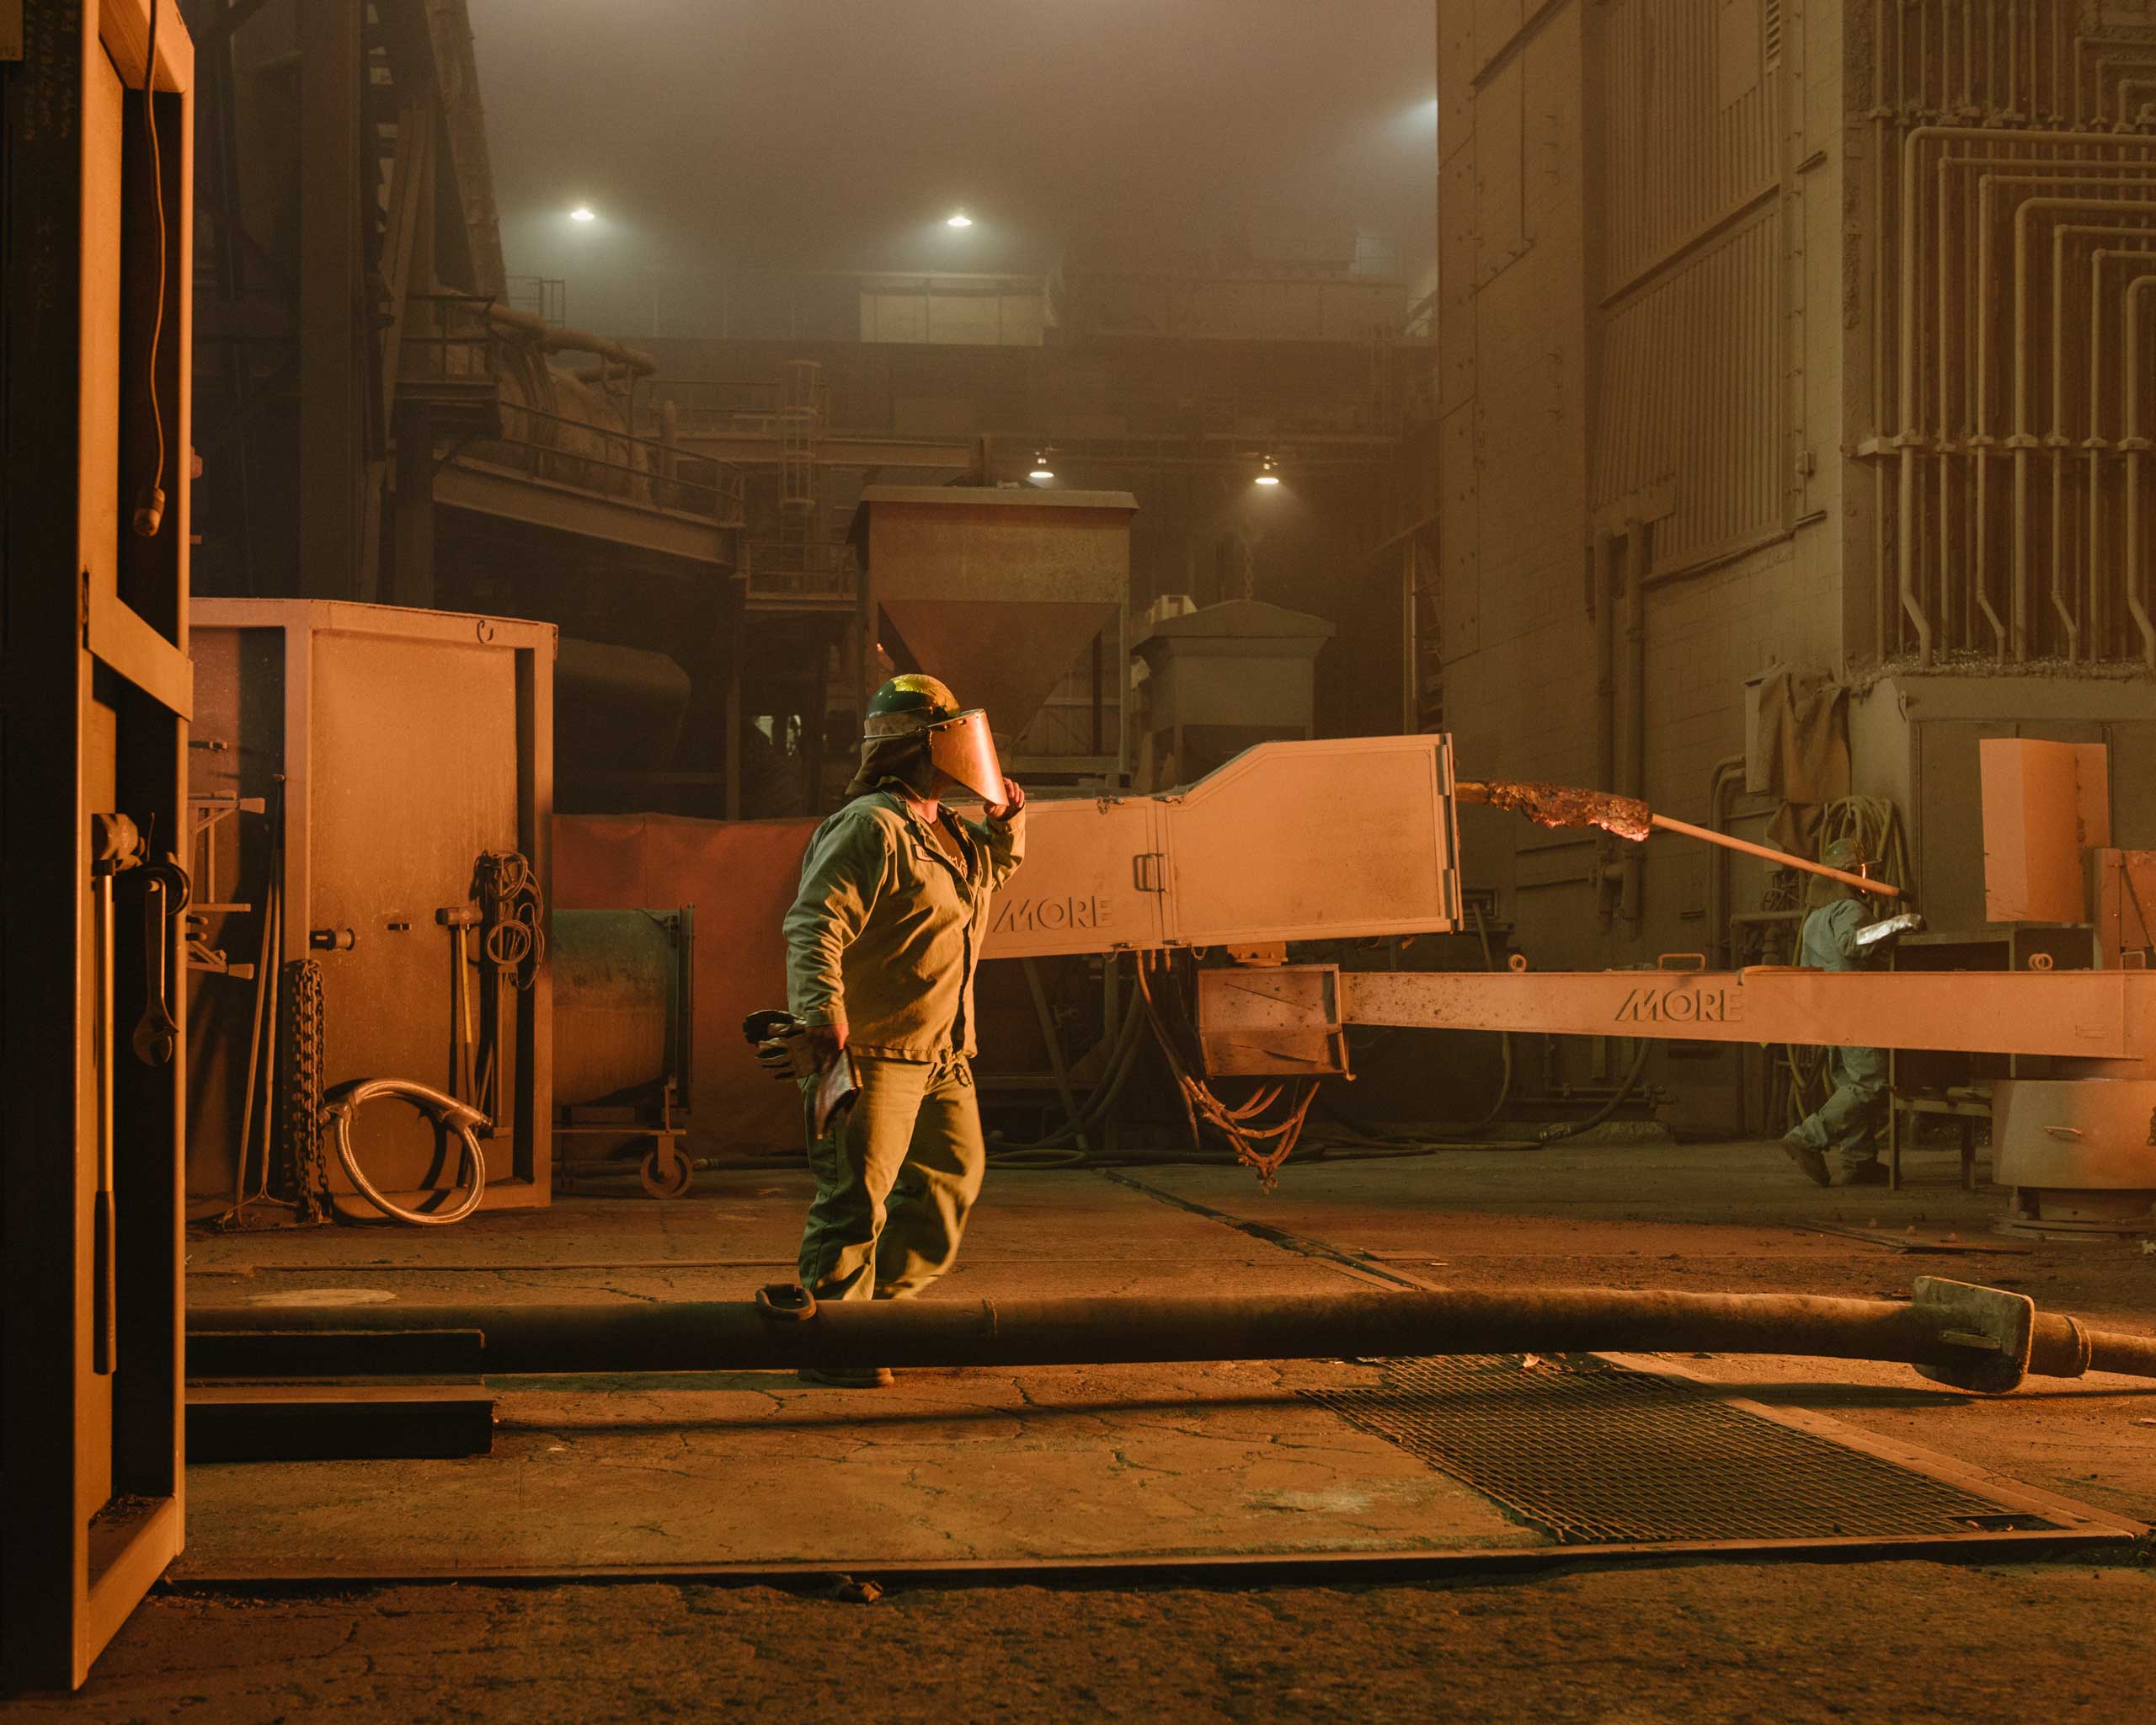 A worker approaches the electric-arc furnace, which uses three giant
                      electrodes to melt scrap into molten steel. Nucor's workers are among the
                      highest-paid in the industry, Crawfordsville, Ind. on Aug. 25, 2014. (Ryan Lowry for TIME)